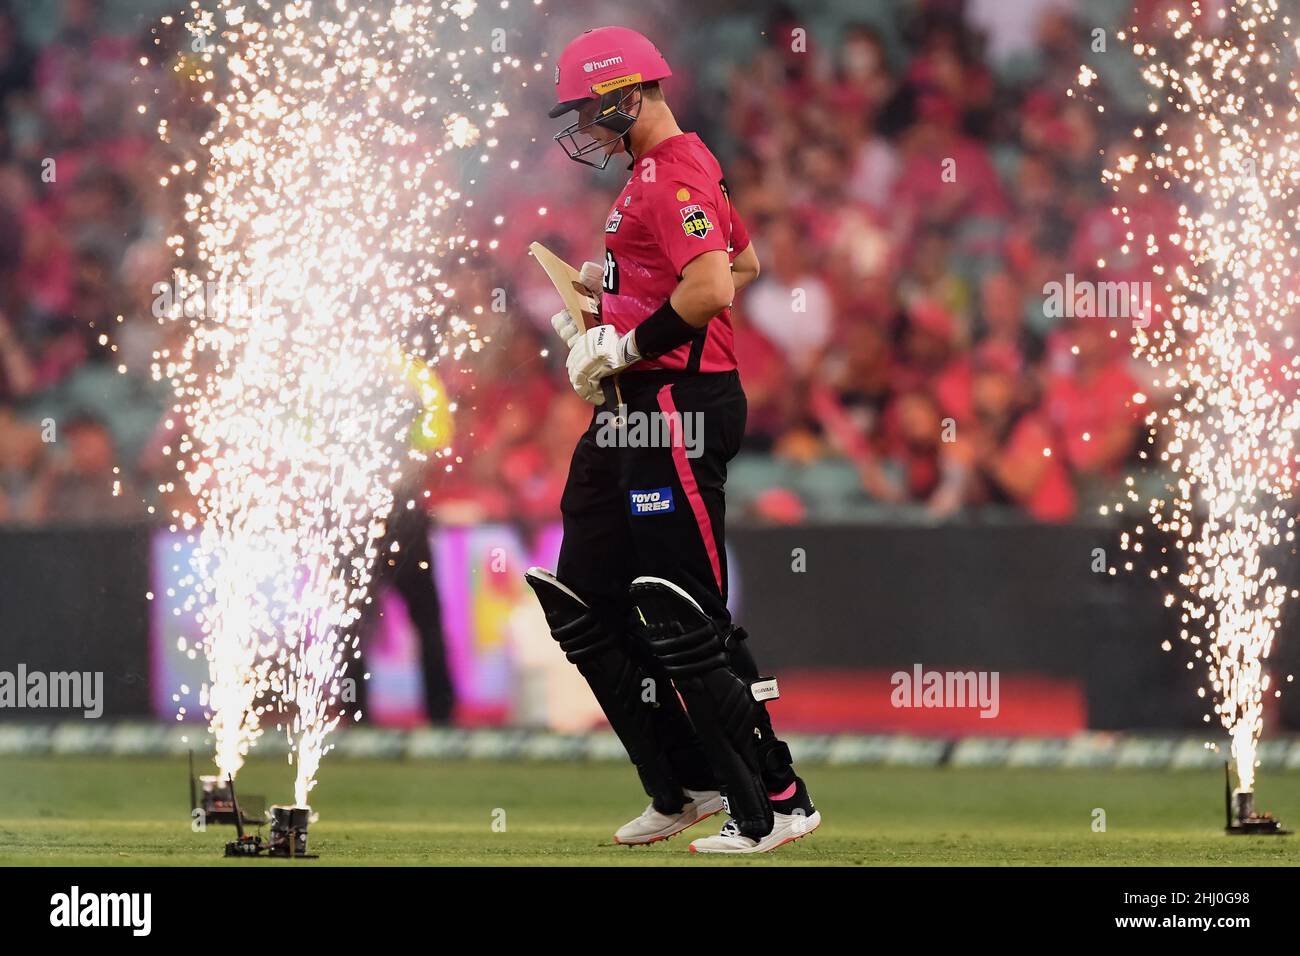 Sydney, Australia, 26 January, 2022. Hayden Kerr of the Sixers walking on to bat during the Big Bash League Challenger cricket match between Sydney Sixers and Adelaide Strikers at The Sydney Cricket Ground on January 26, 2022 in Sydney, Australia. Credit: Steven Markham/Speed Media/Alamy Live News Stock Photo